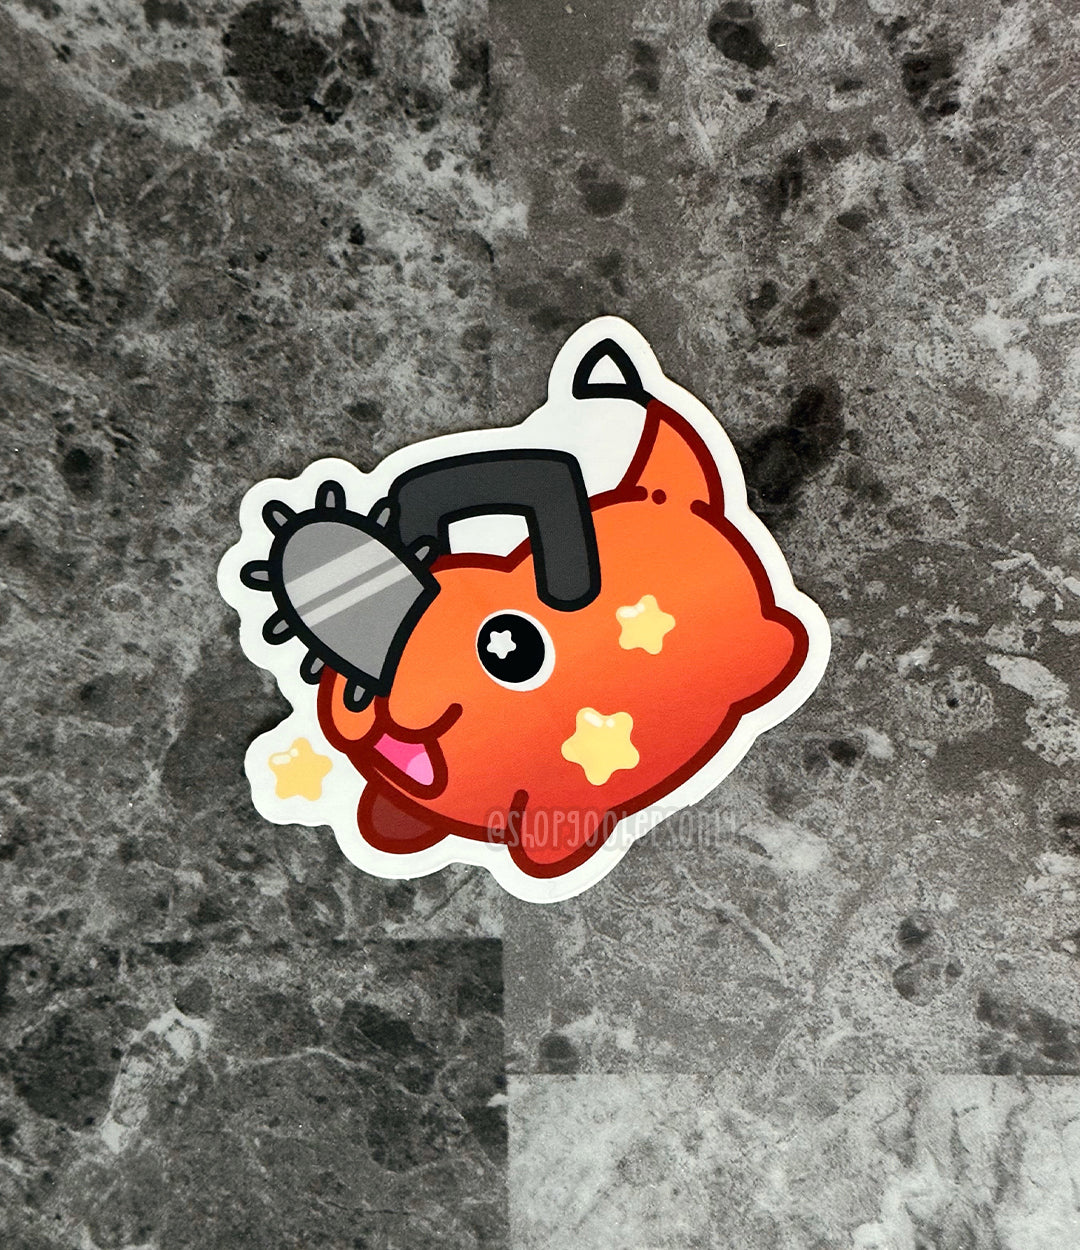 Chainsaw Pooch Stickers!